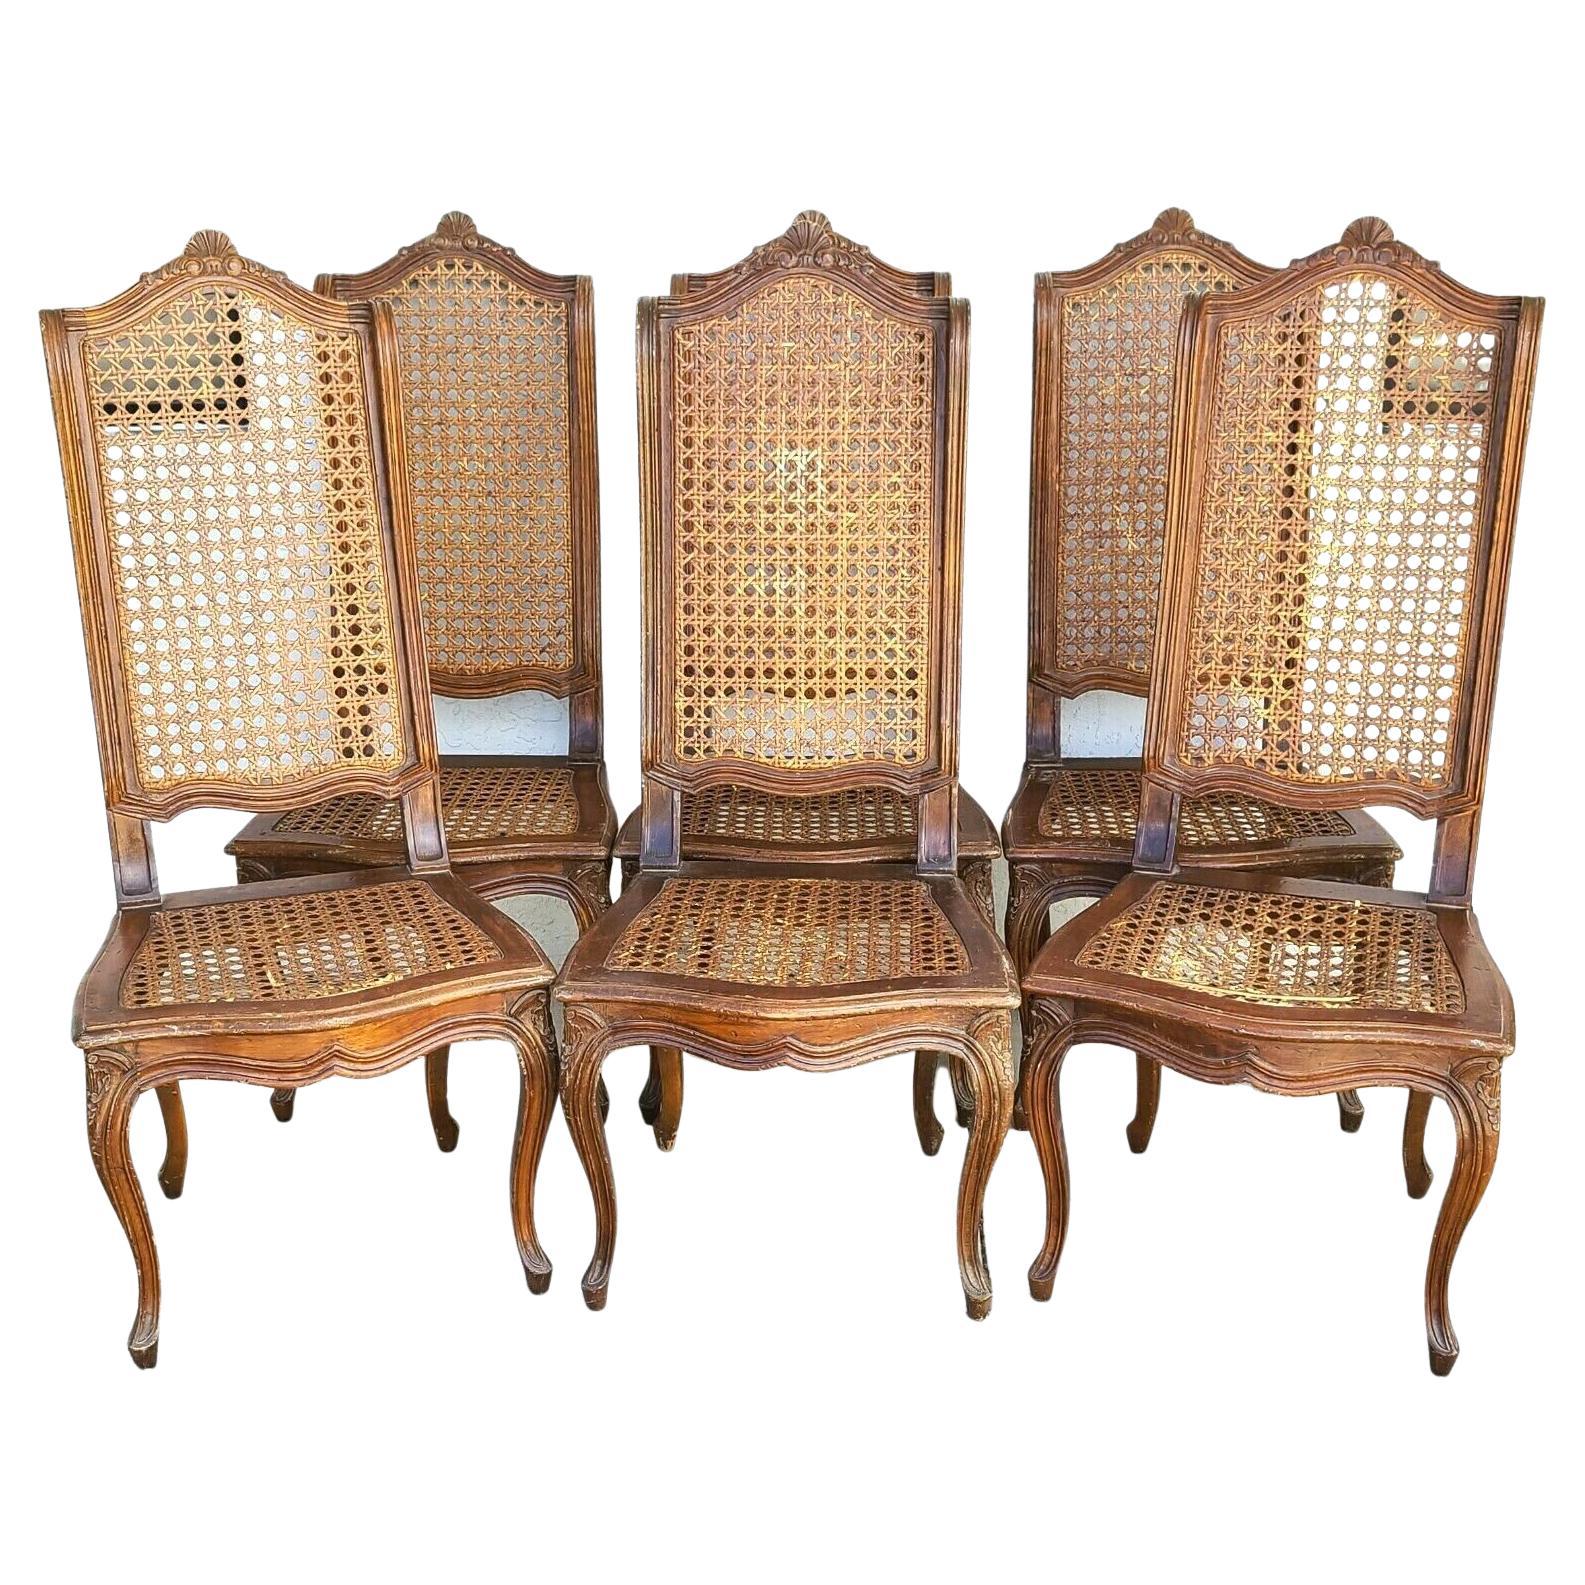 '6' Mid Century French Wingback Cane Dining Chairs by Mariano Garcia of Spain